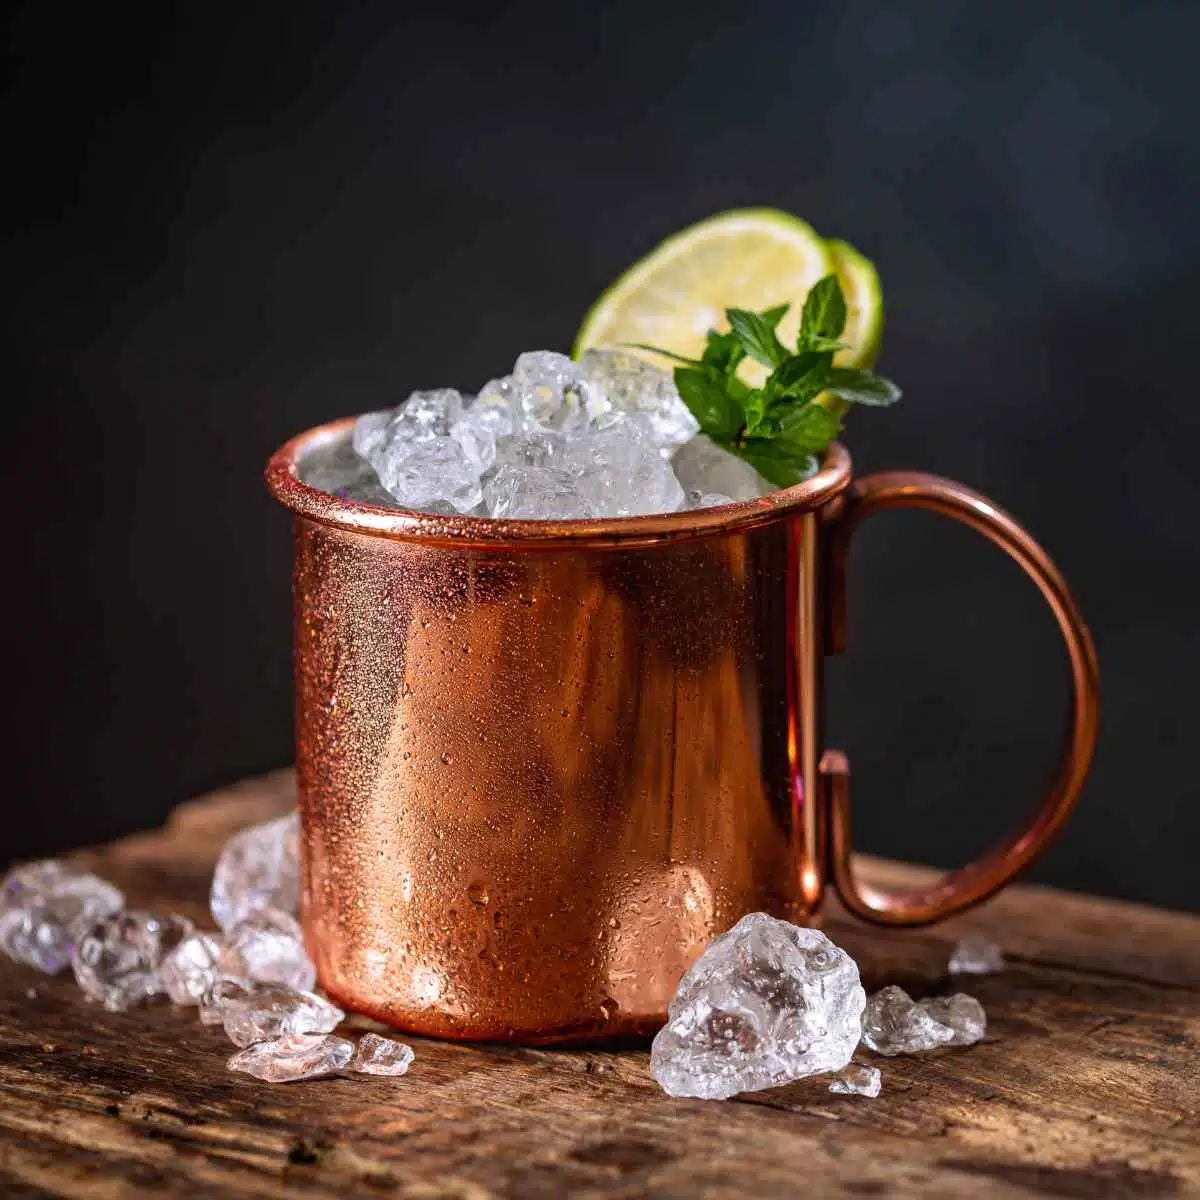 Moscow Mule cocktail in copper mug served with crushed ice